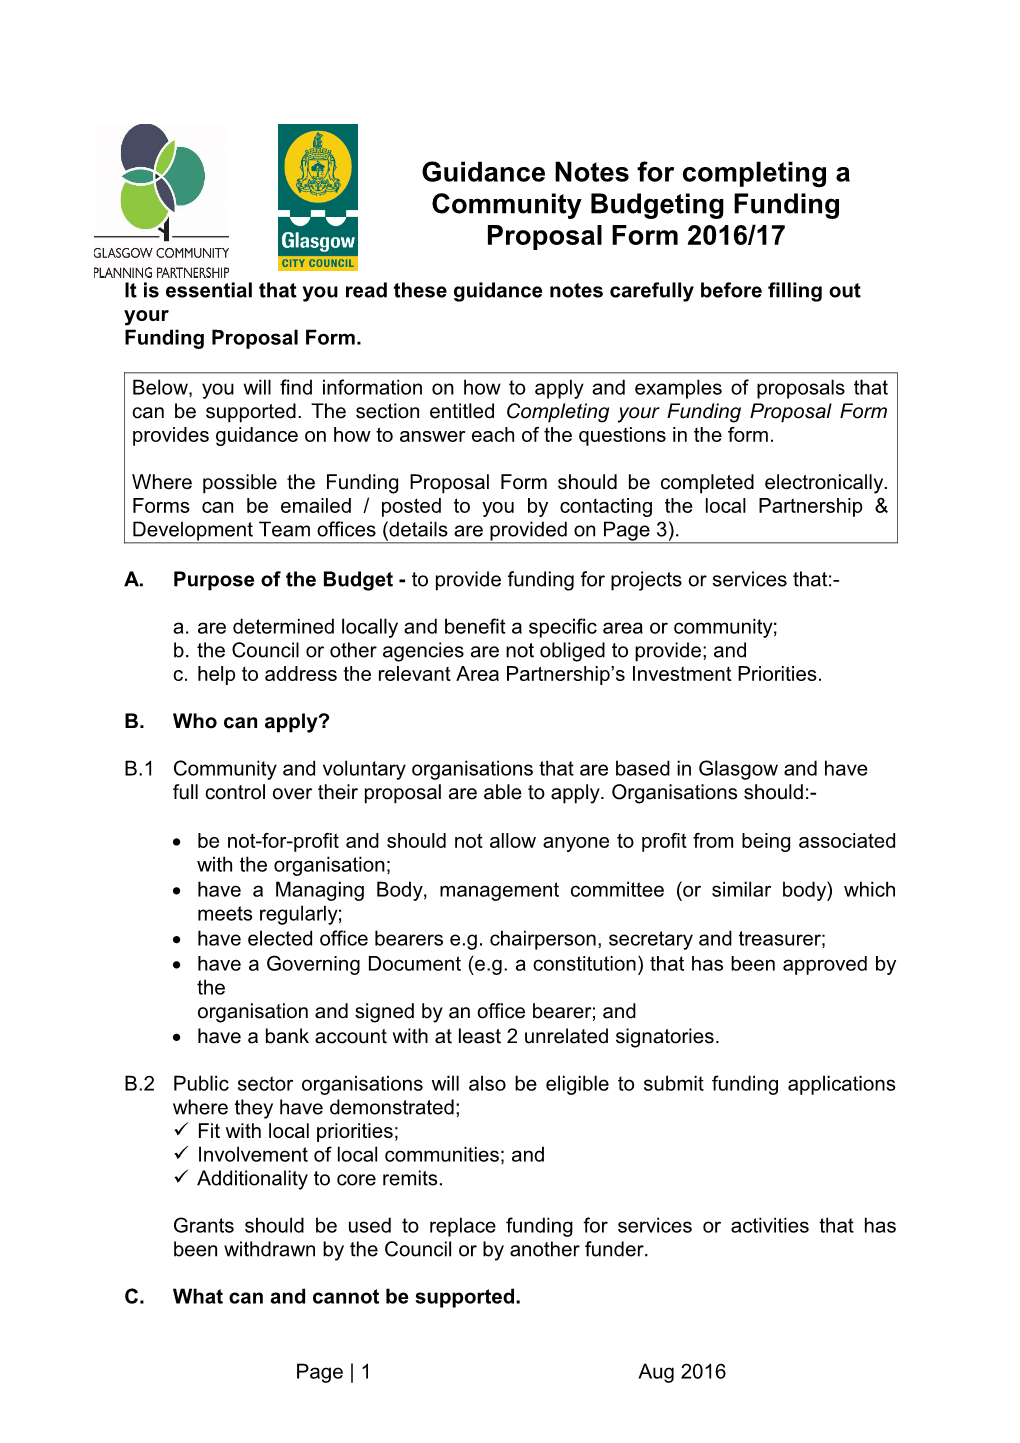 Guidance Notes for Completing a Community Budgeting Funding Proposal Form 2016/17